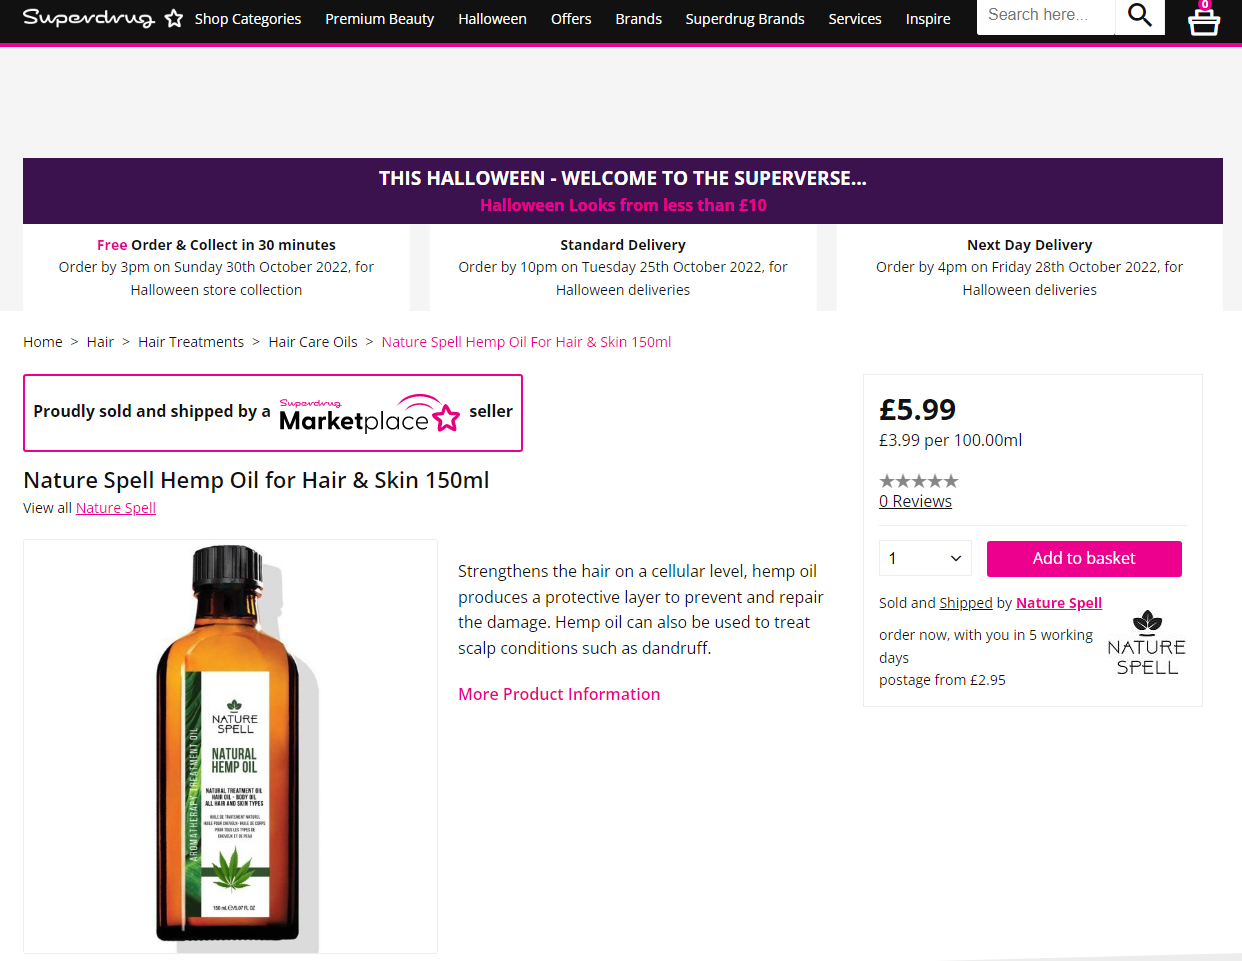 Superdrug launches first high street retailer health & beauty marketplace